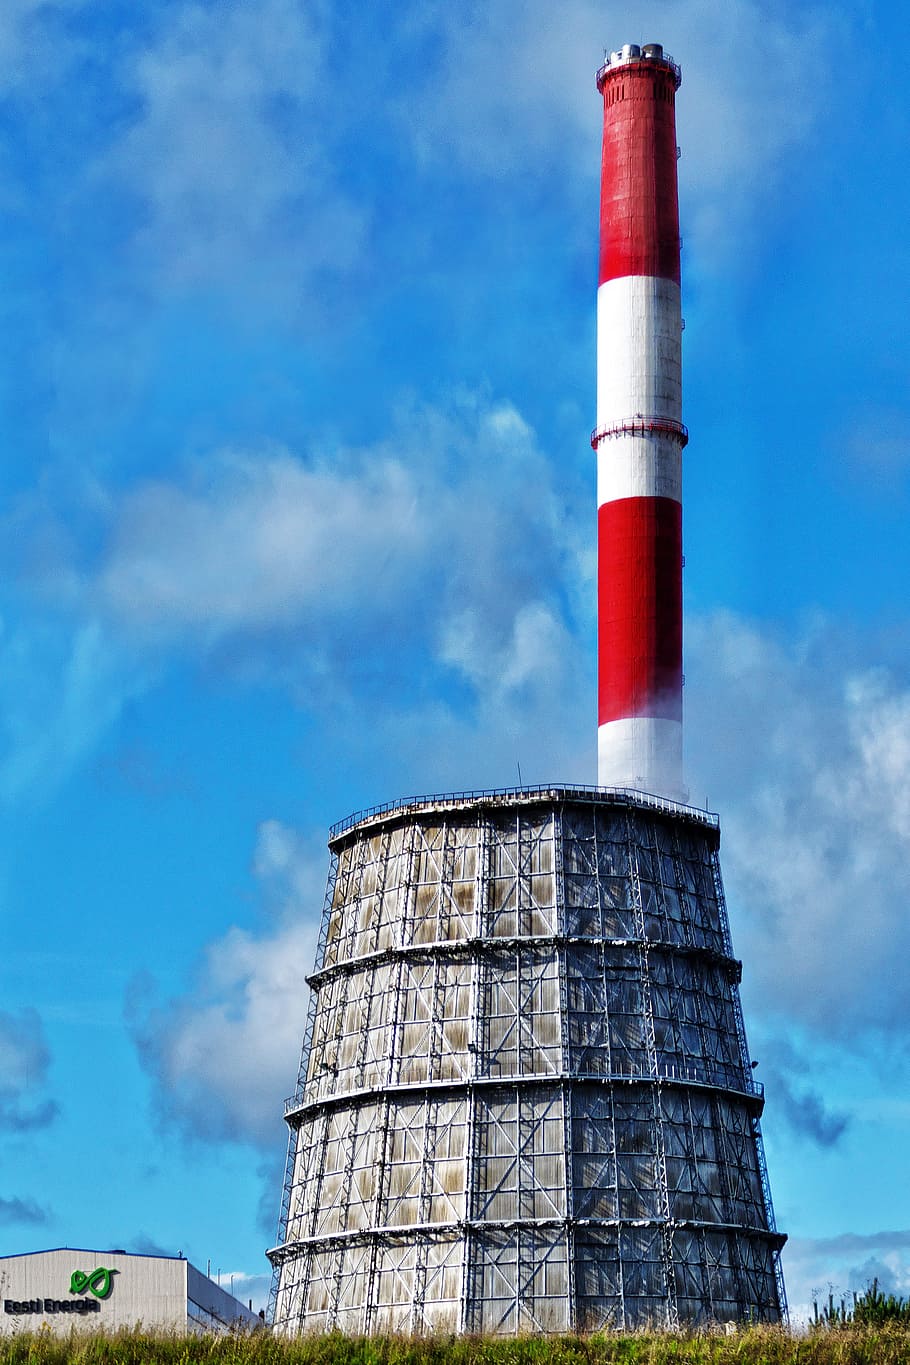 cooling tower, chimney, power plant, energy, snapshot, electricity, technology, estonia, baltic states, architecture